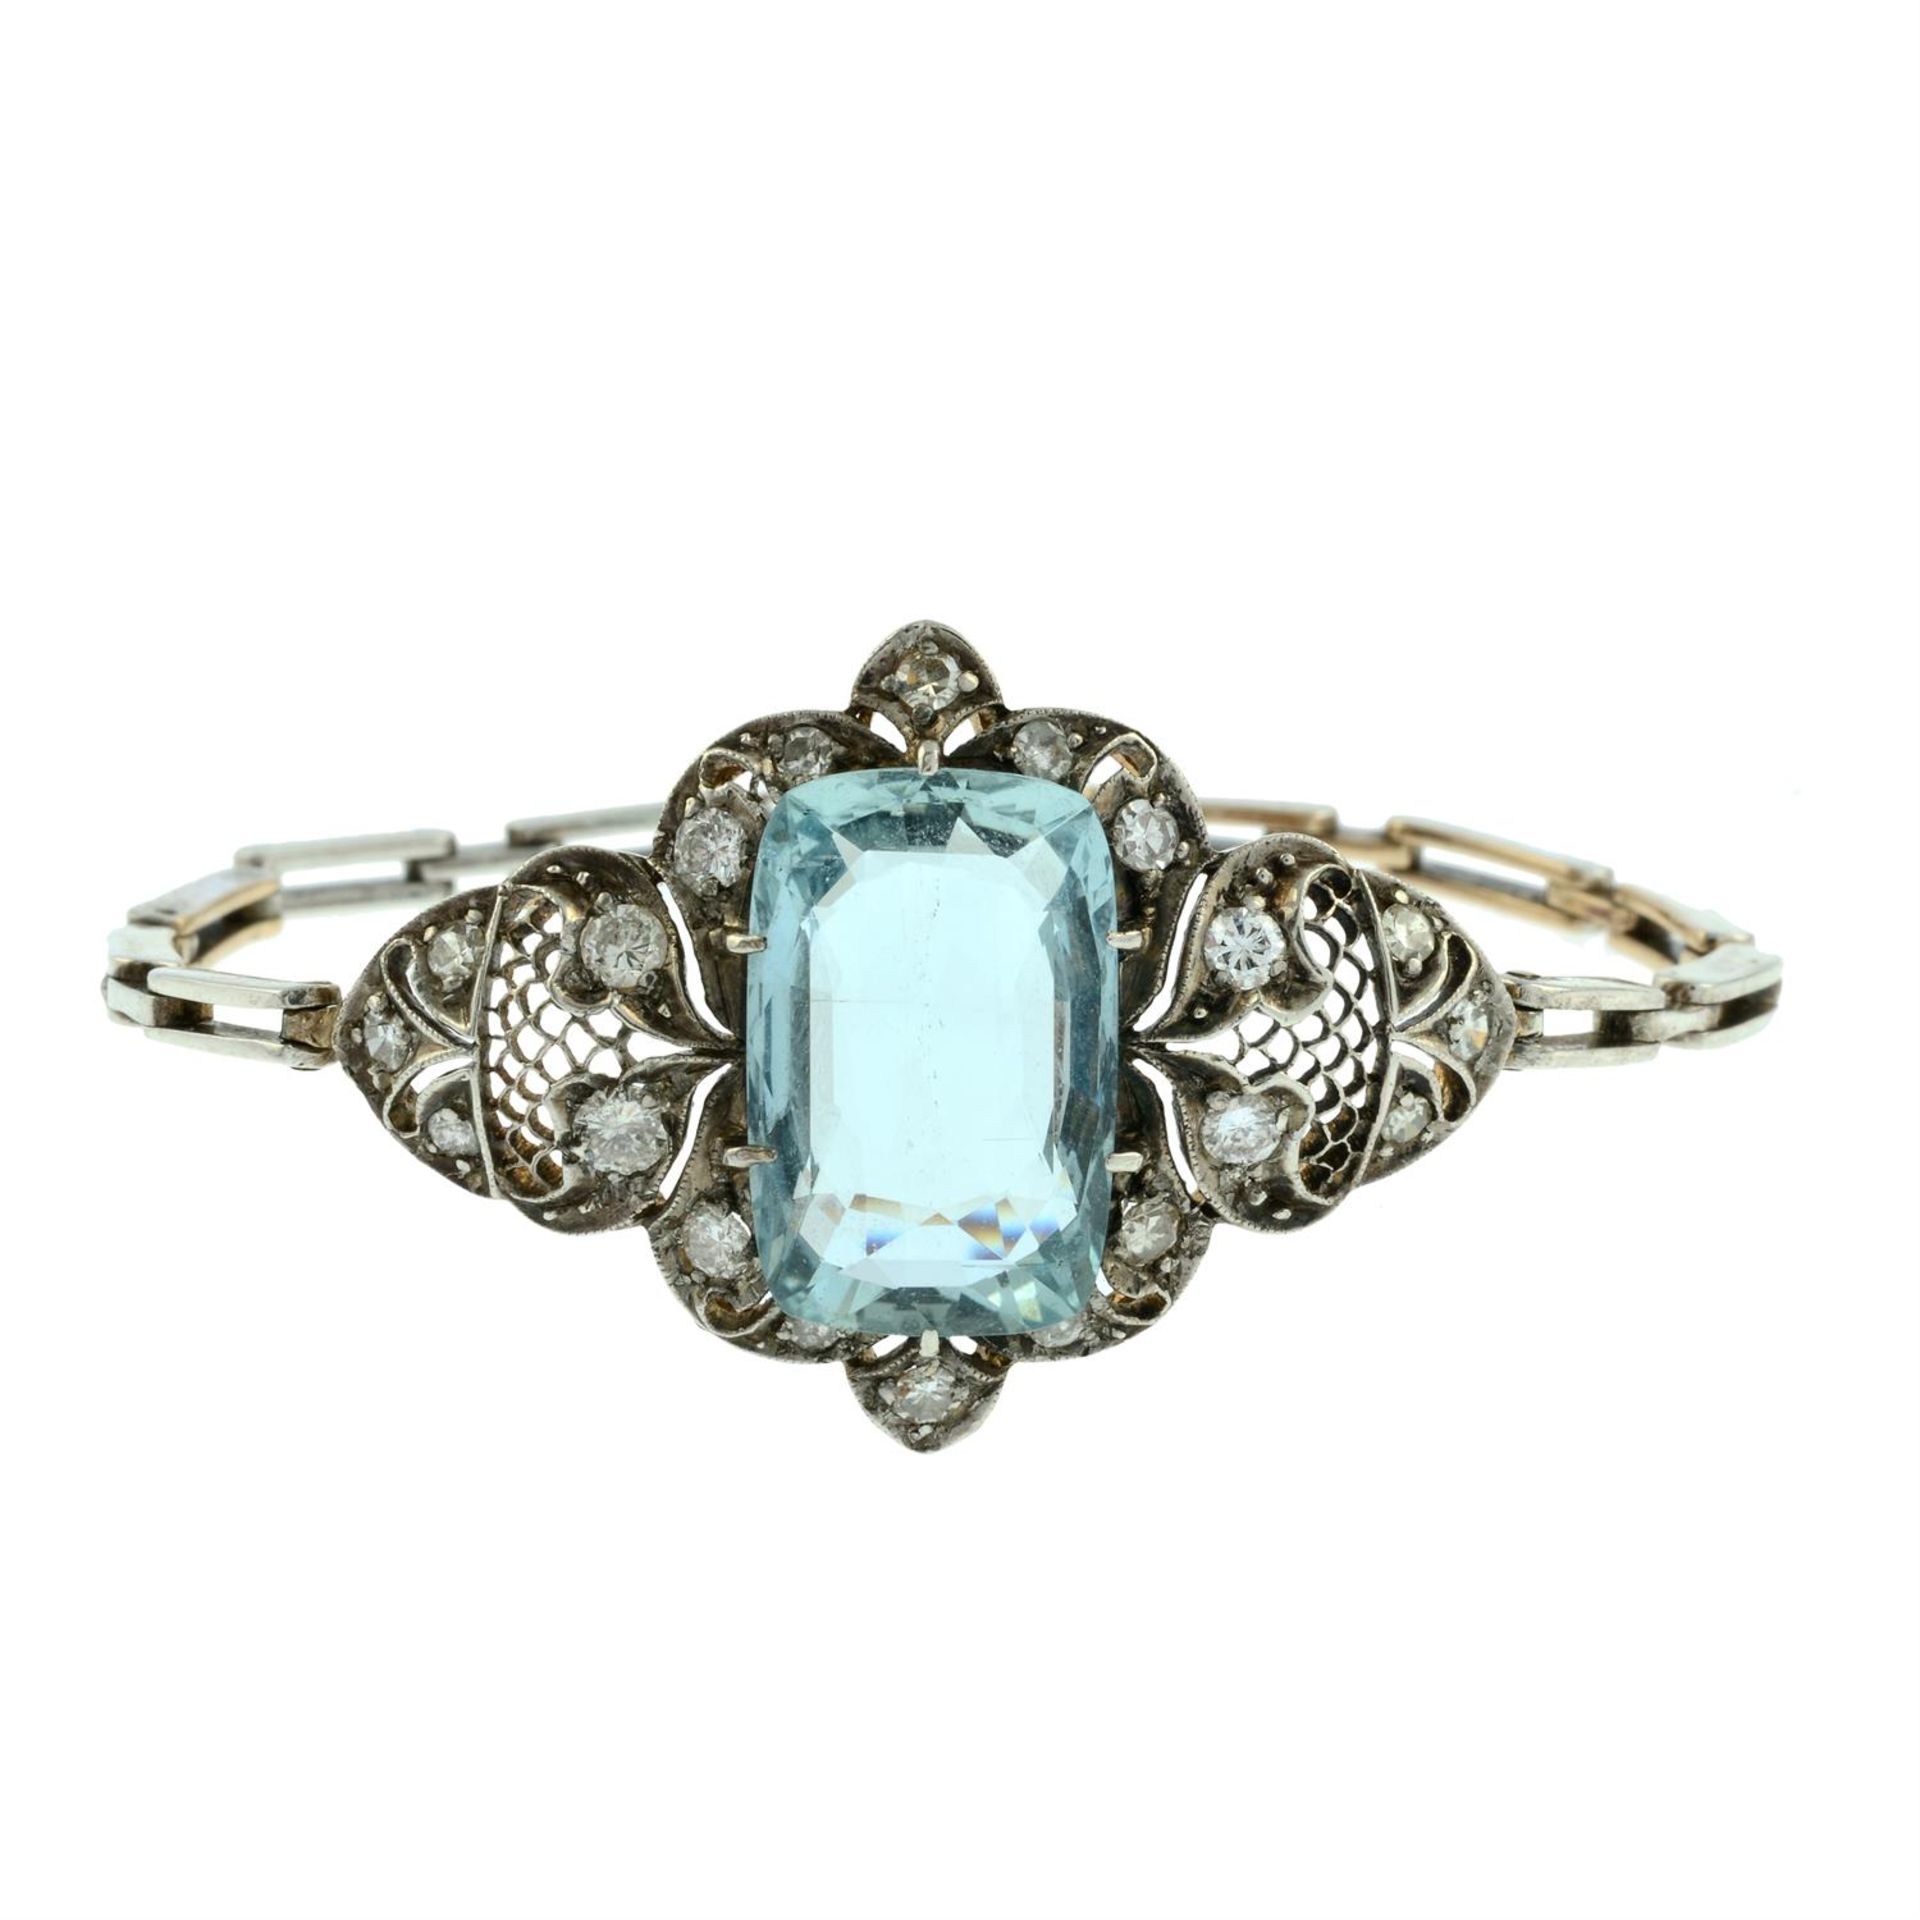 A mid 20th century silver and gold aquamarine, single and brilliant-cut diamond bracelet. - Image 2 of 4